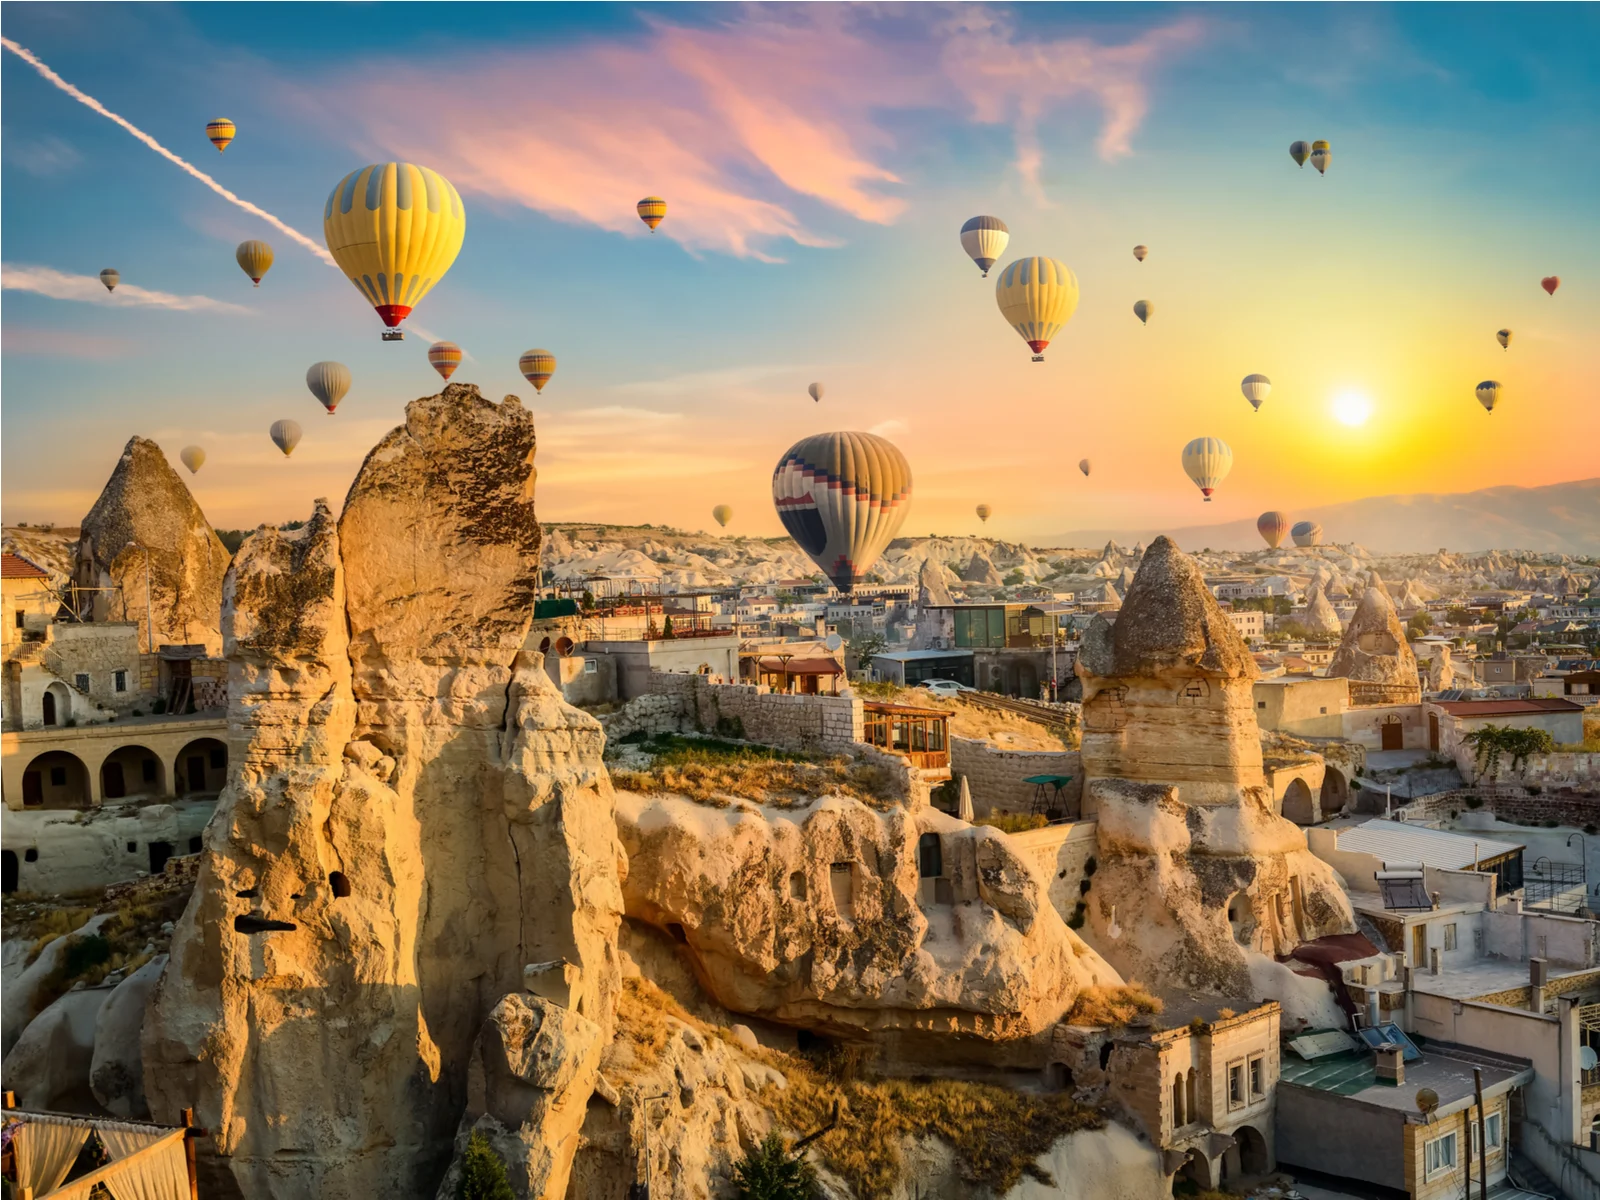 Hot air balloons at sunset in the Goreme village during the best time to visit Turkey